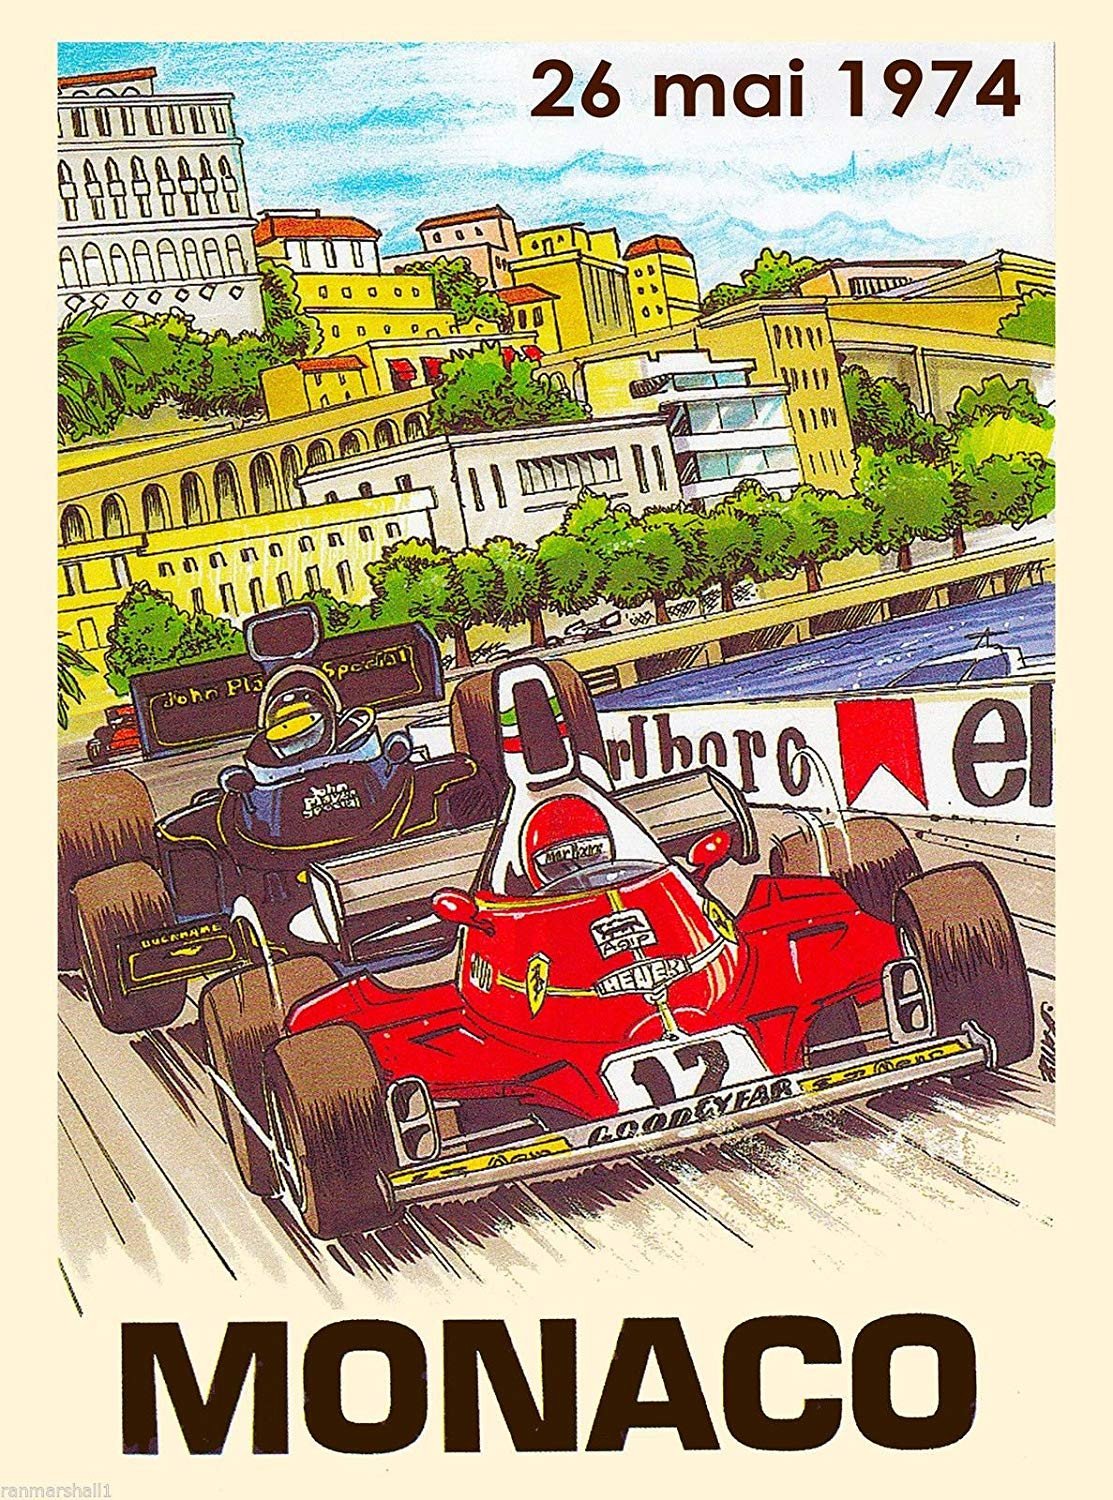 Race Car Bedroom Decor Beautiful A Slice In Time 1974 Monaco Grand Prix Automobile Race Car Travel Advertisement Vintage Collectible Wall Decor Poster Print Measures 10 X 13 5 Inches